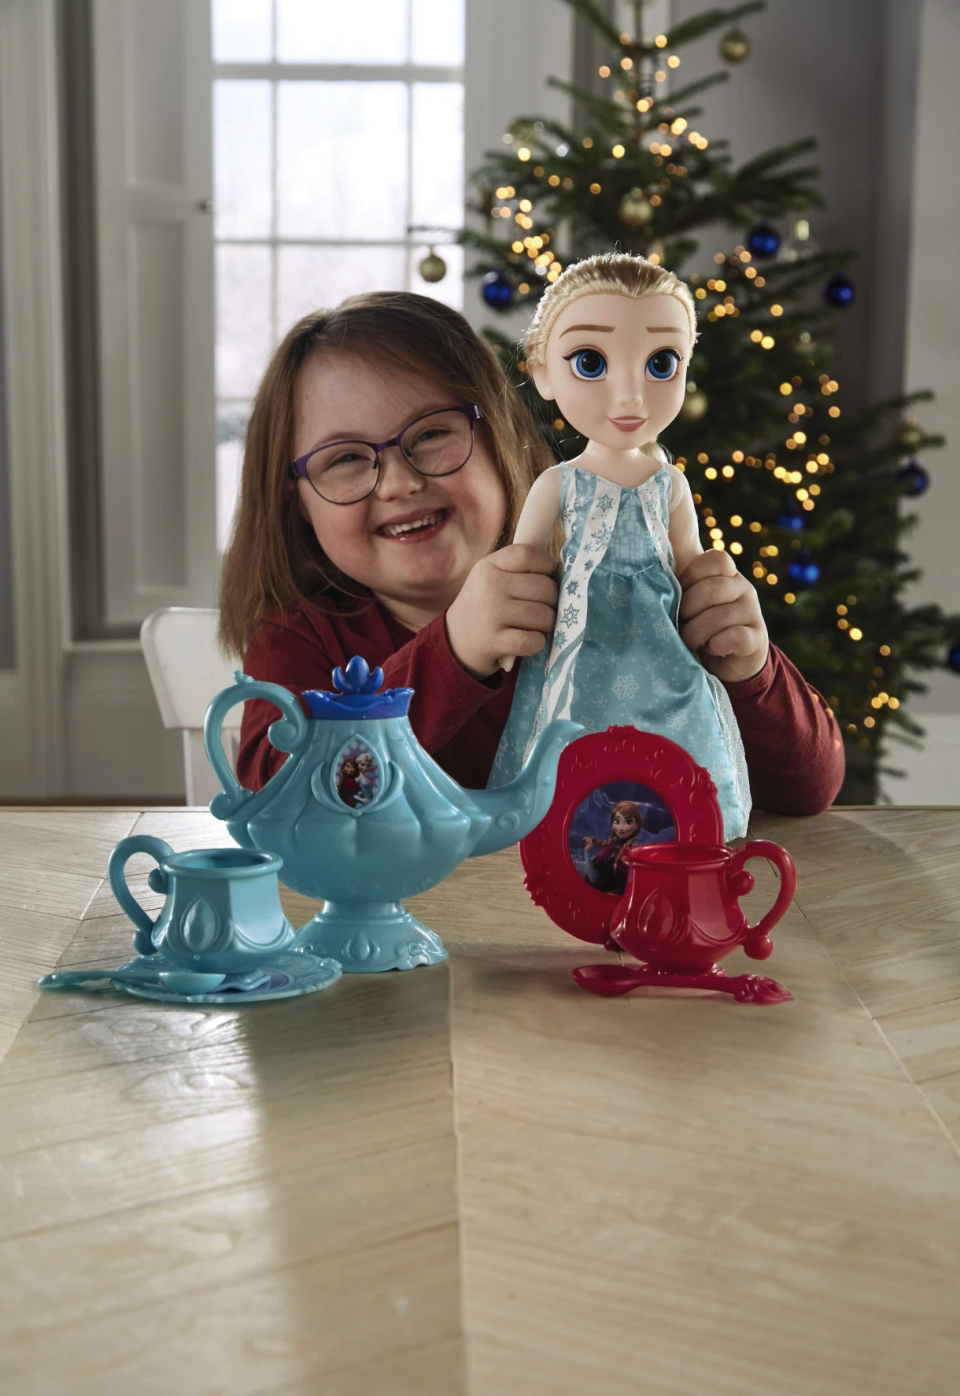 Elsa and Anna dolls are available, too. [Photo: Aldi]